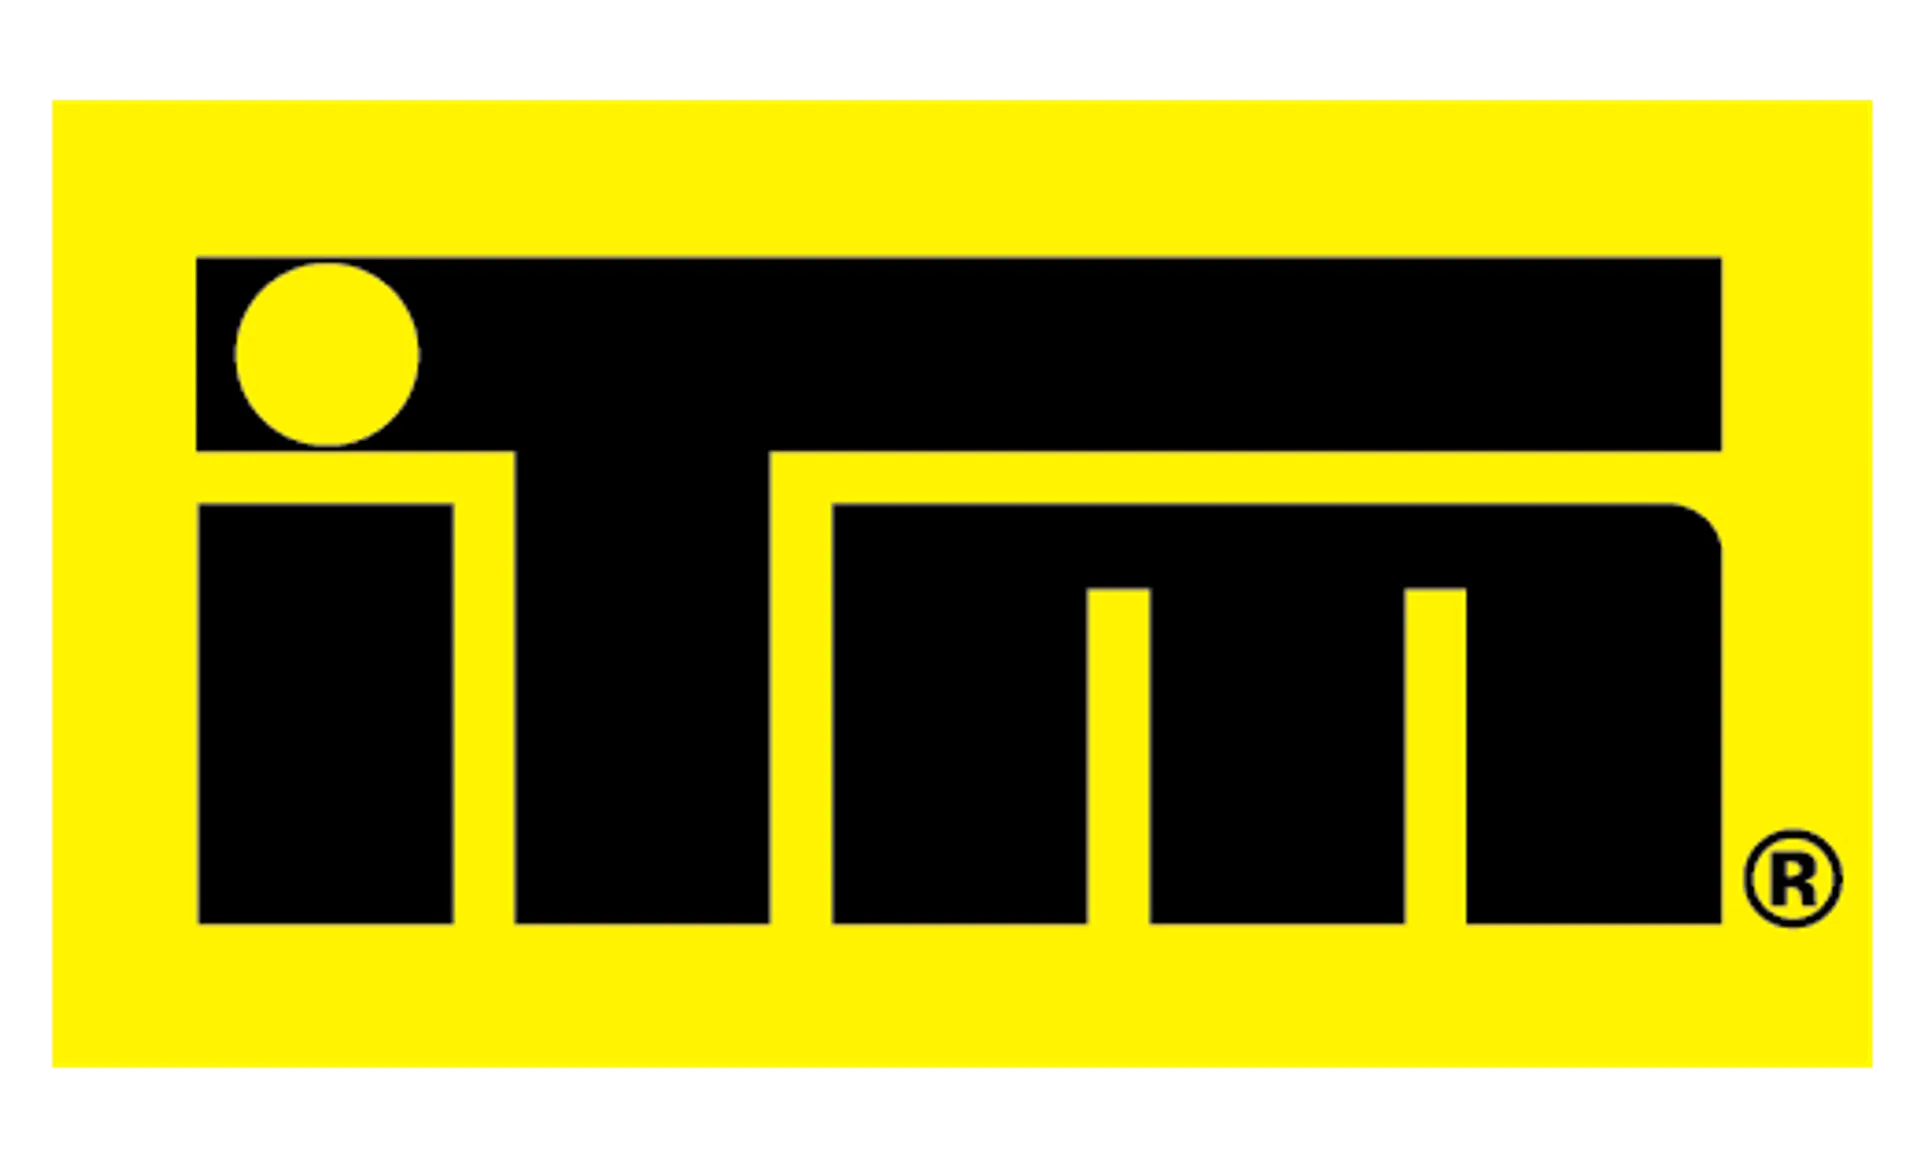 ITM BUILDING logo. Current weekly ad